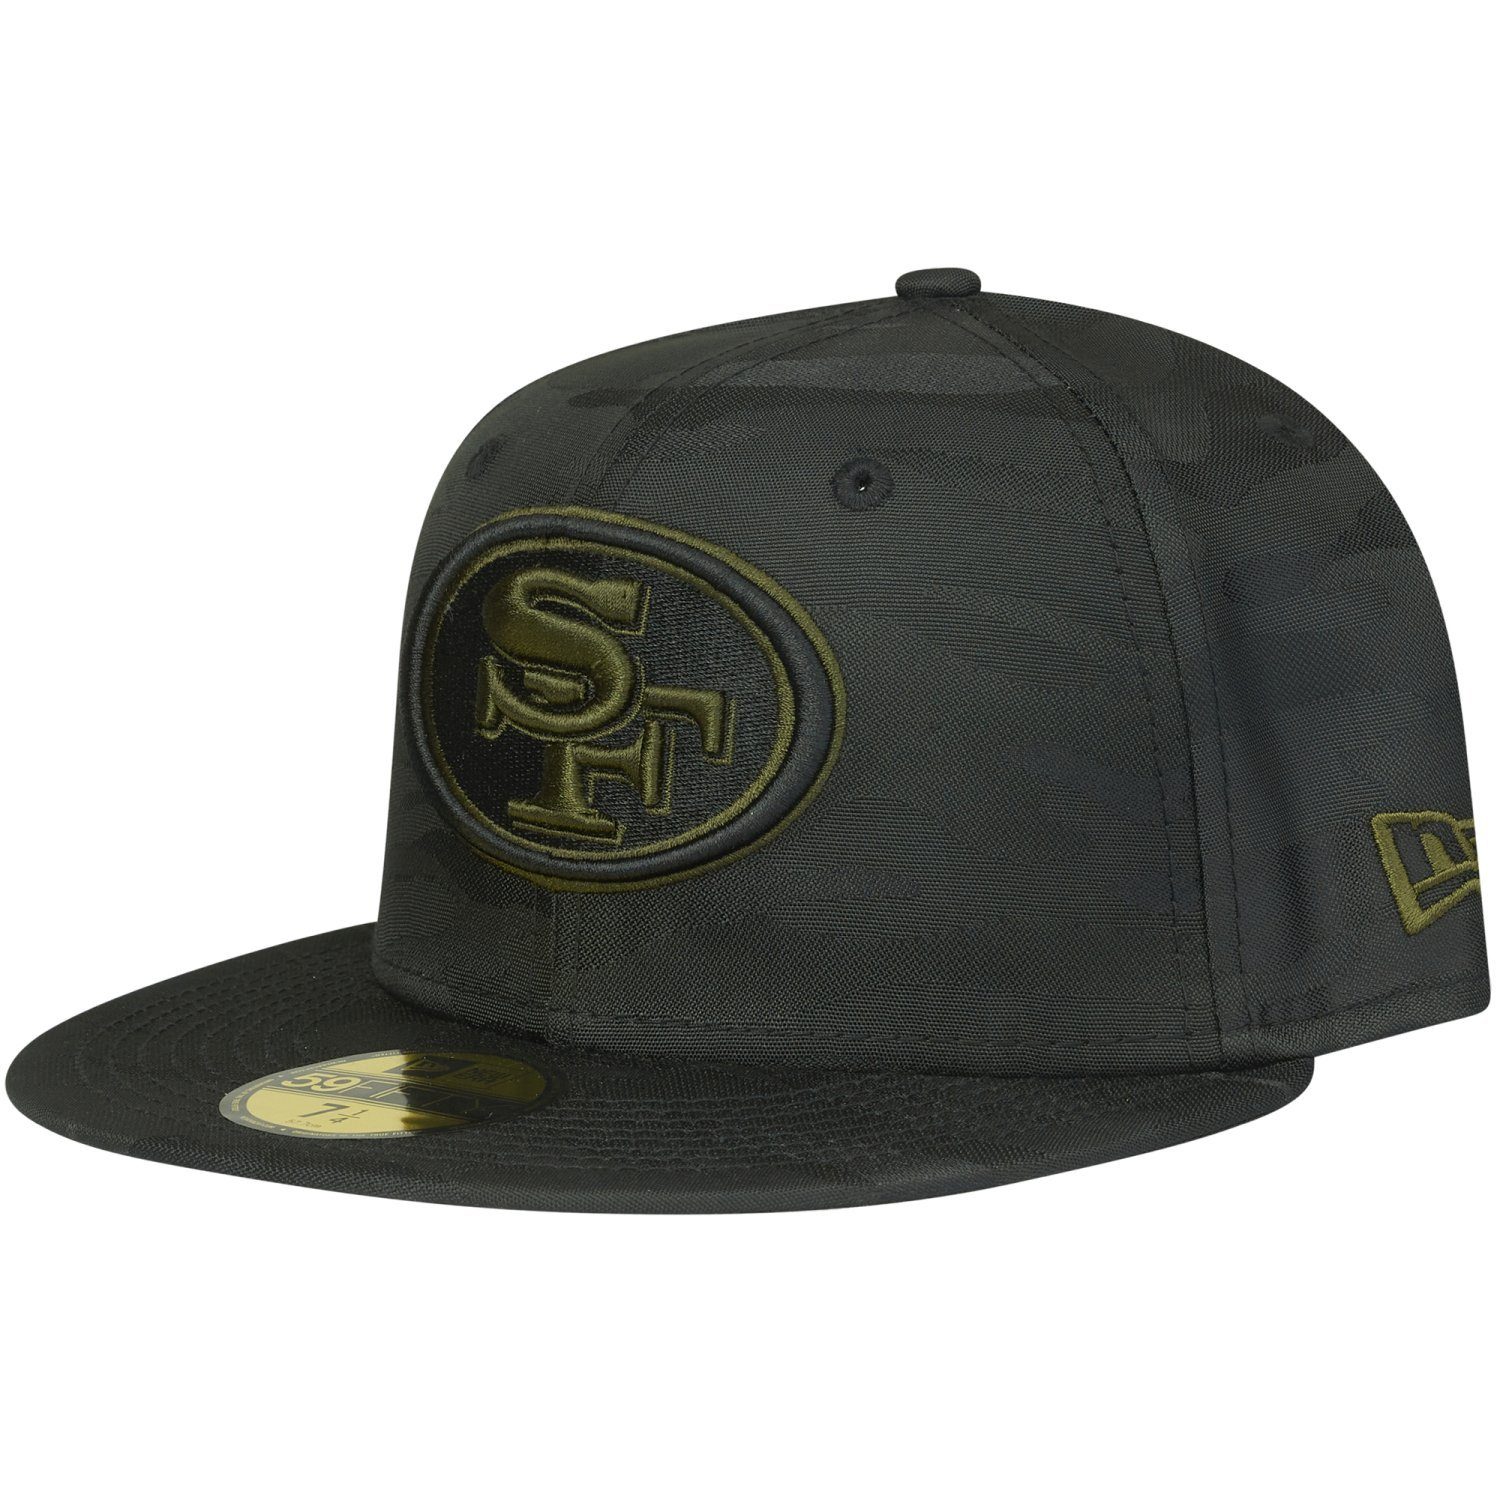 New Era Fitted Cap 59Fifty NFL TEAMS alpine San Francisco 49ers